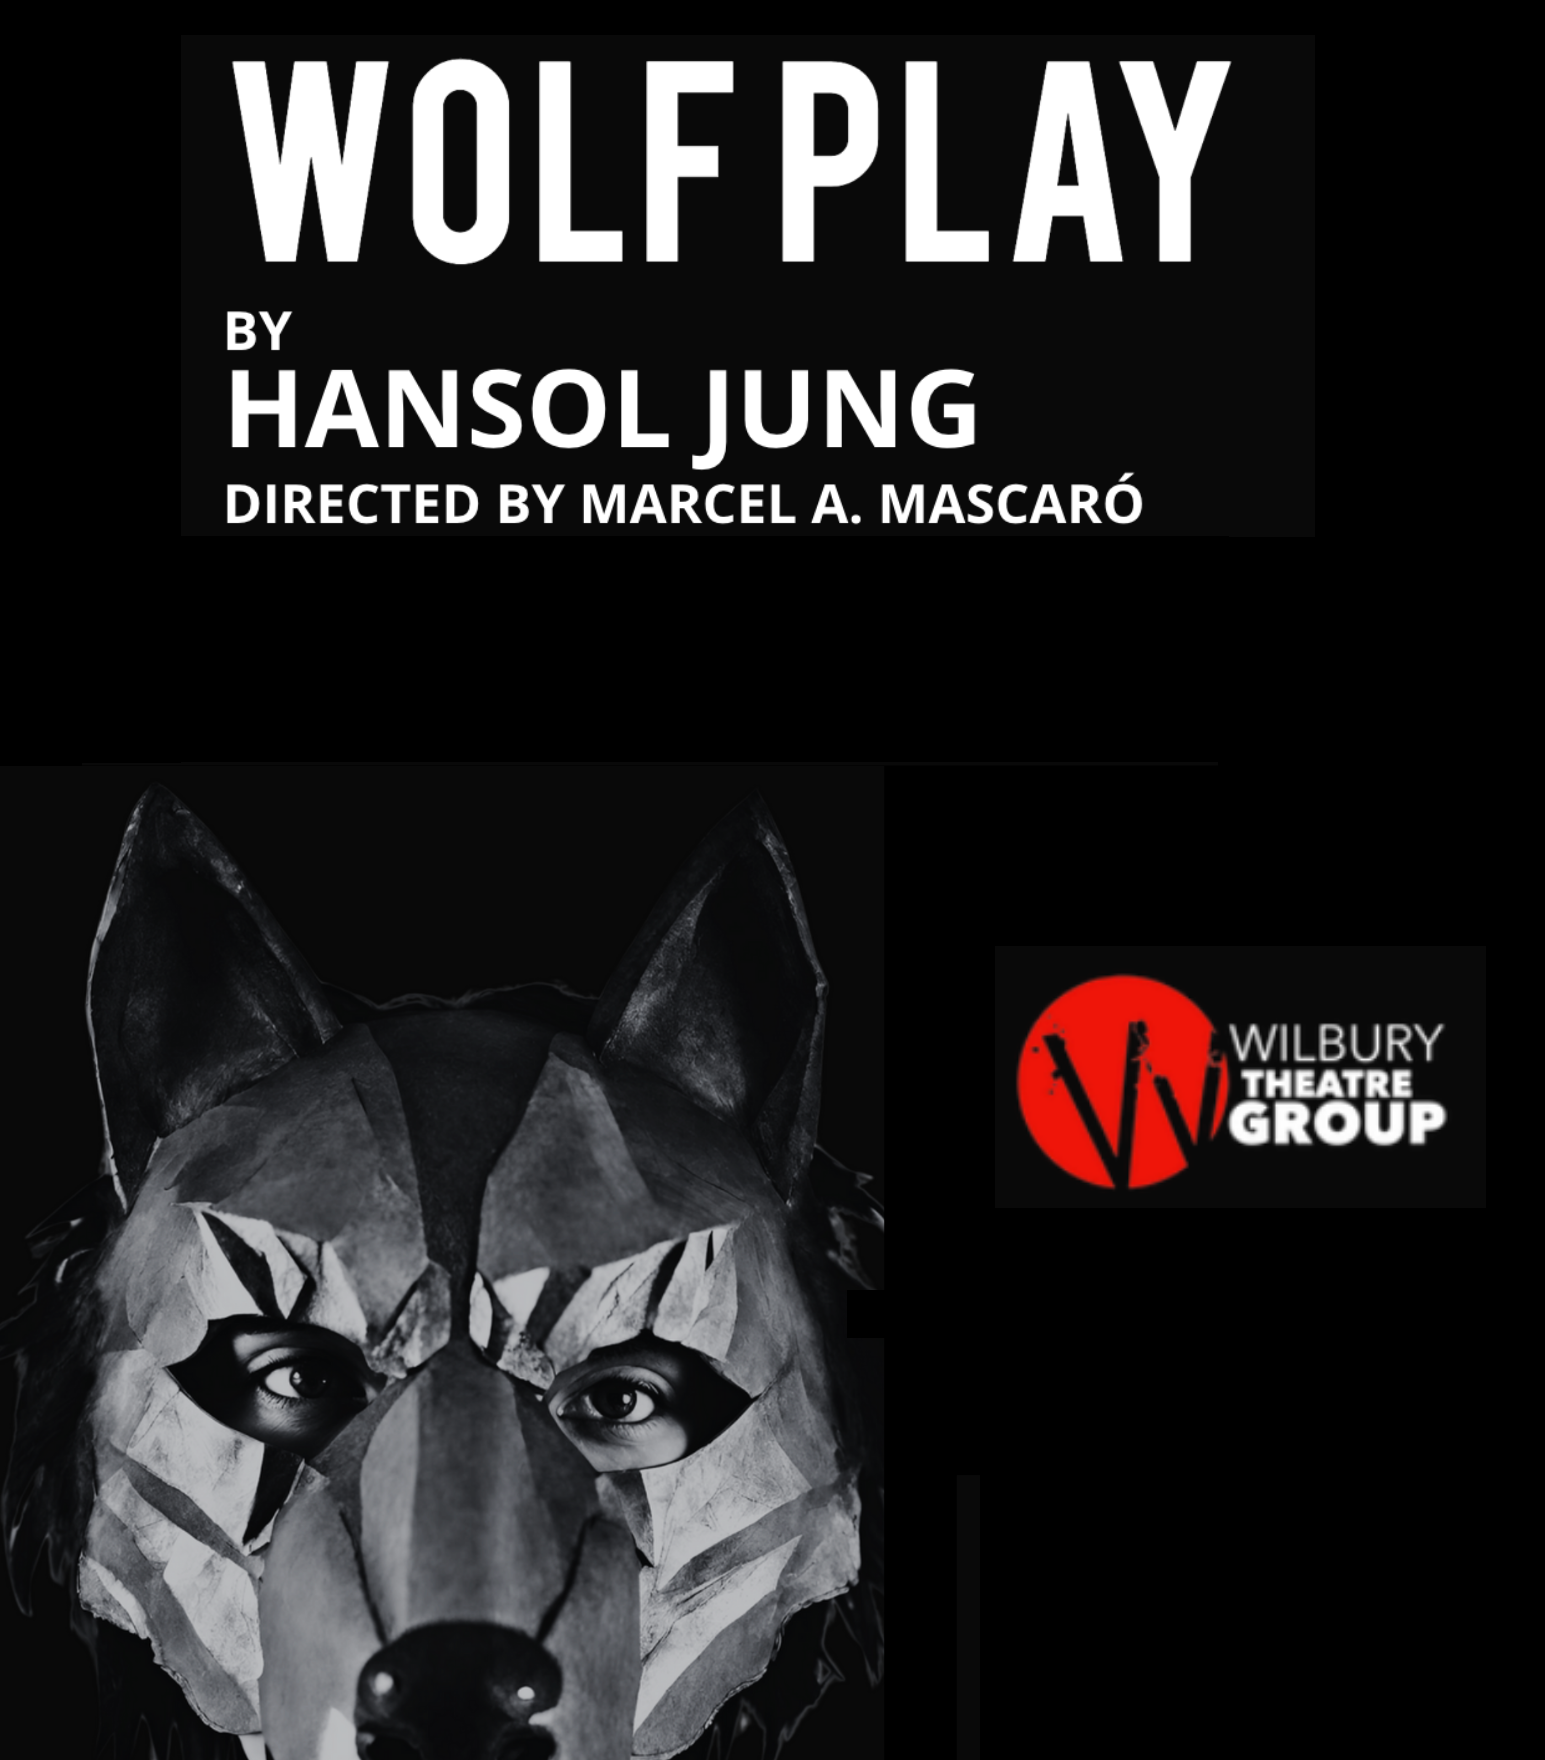 "Wolf Play" - by Hansol Jung - Wilbury Theatre Group (Providence, R.I.)